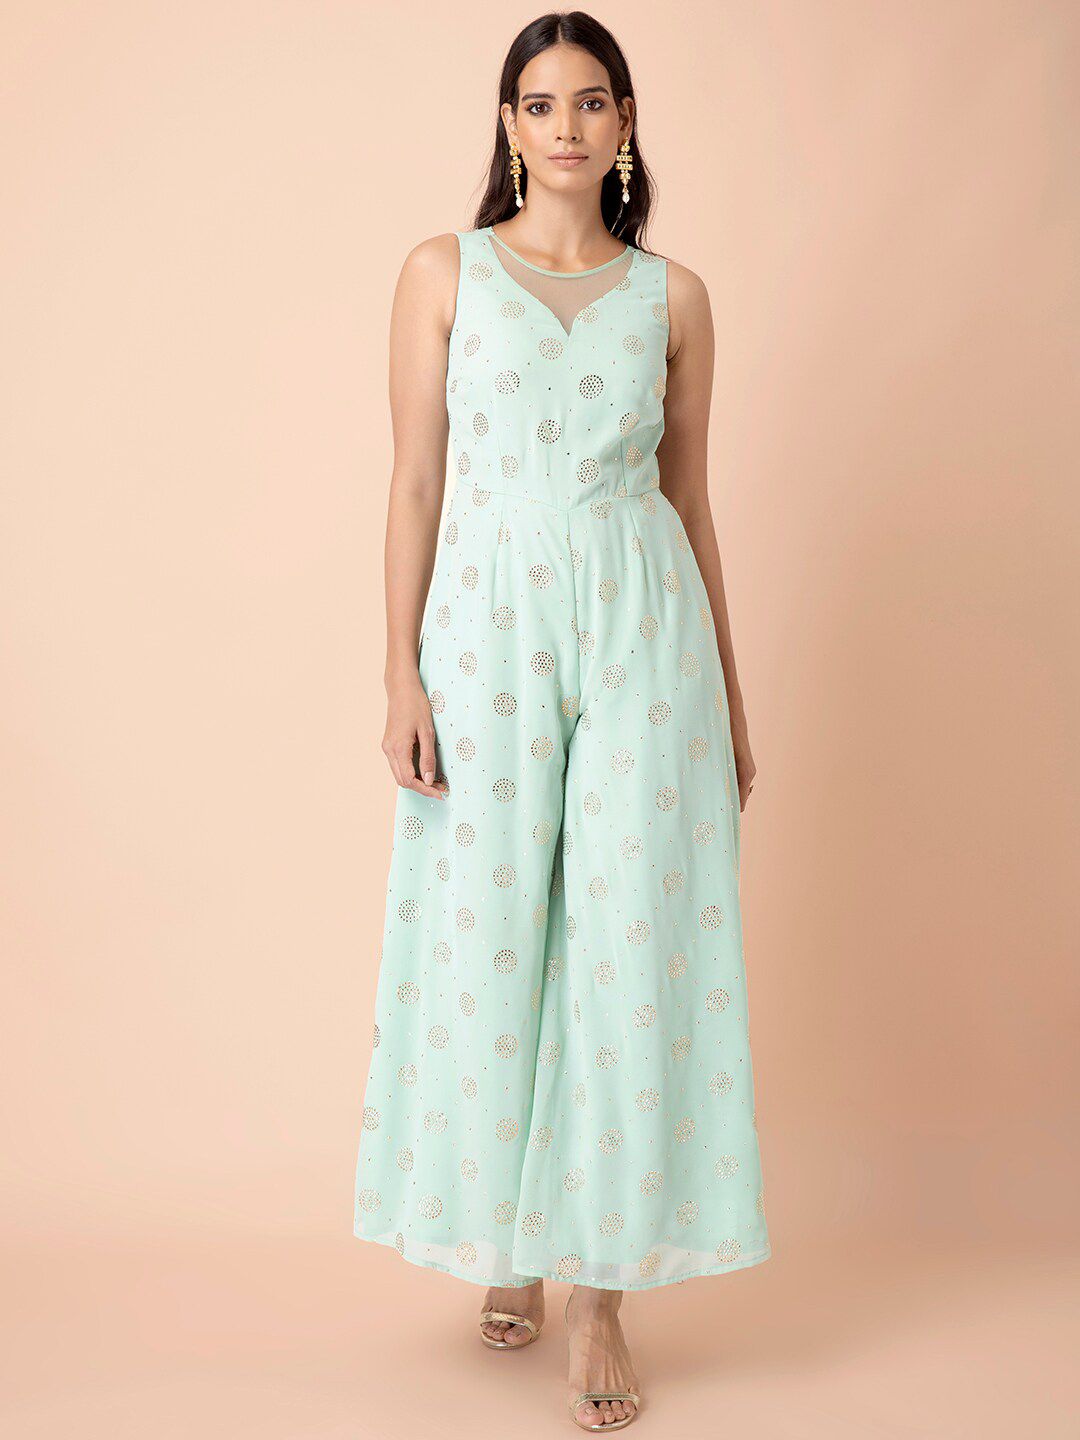 INDYA Green Printed Basic Jumpsuit Price in India